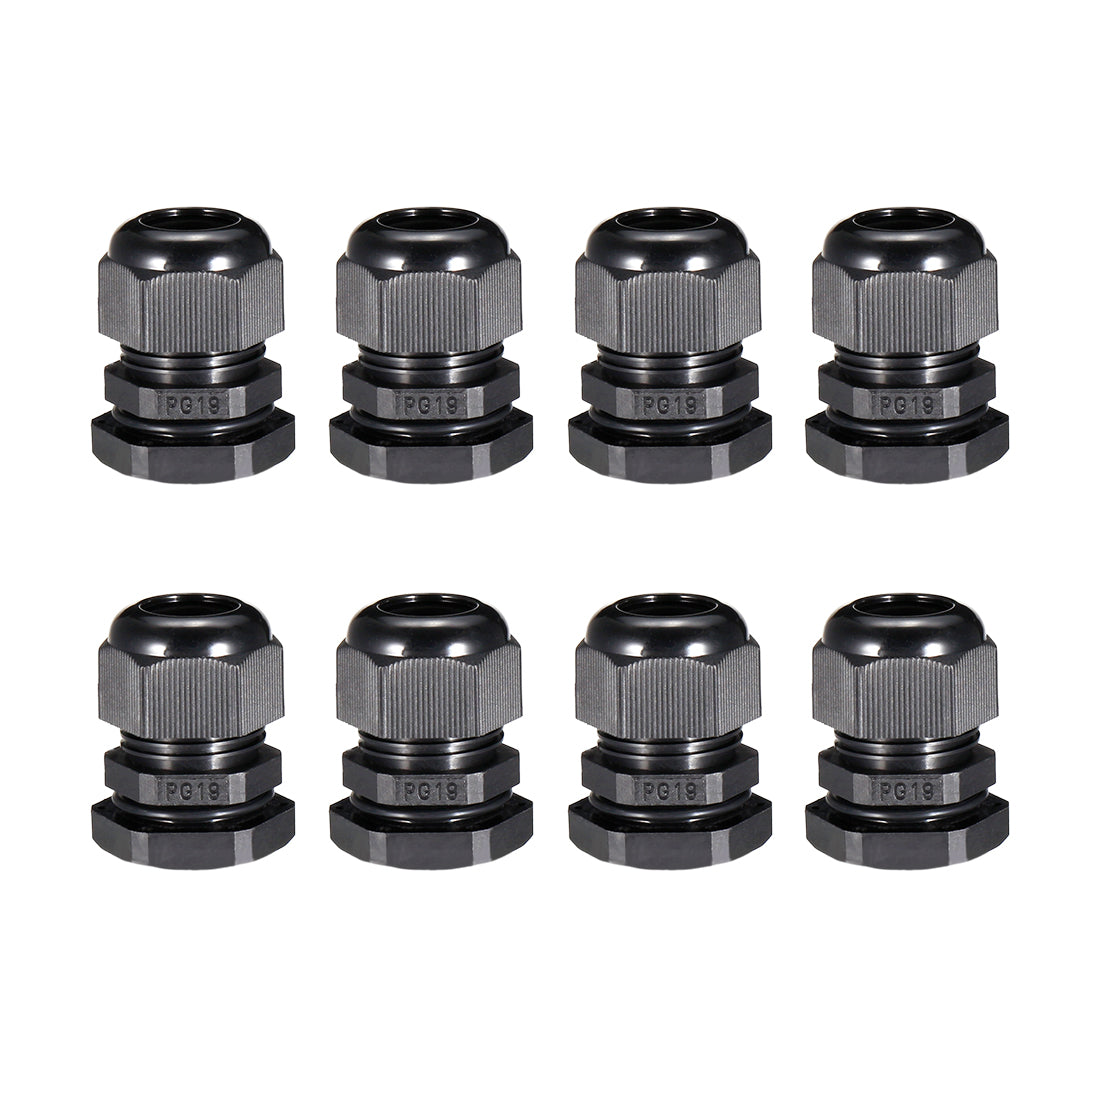 uxcell Uxcell PG19 Cable Gland Waterproof Plastic Joint Adjustable Locknut for 8-15mm Dia Cable Wire 8Pcs